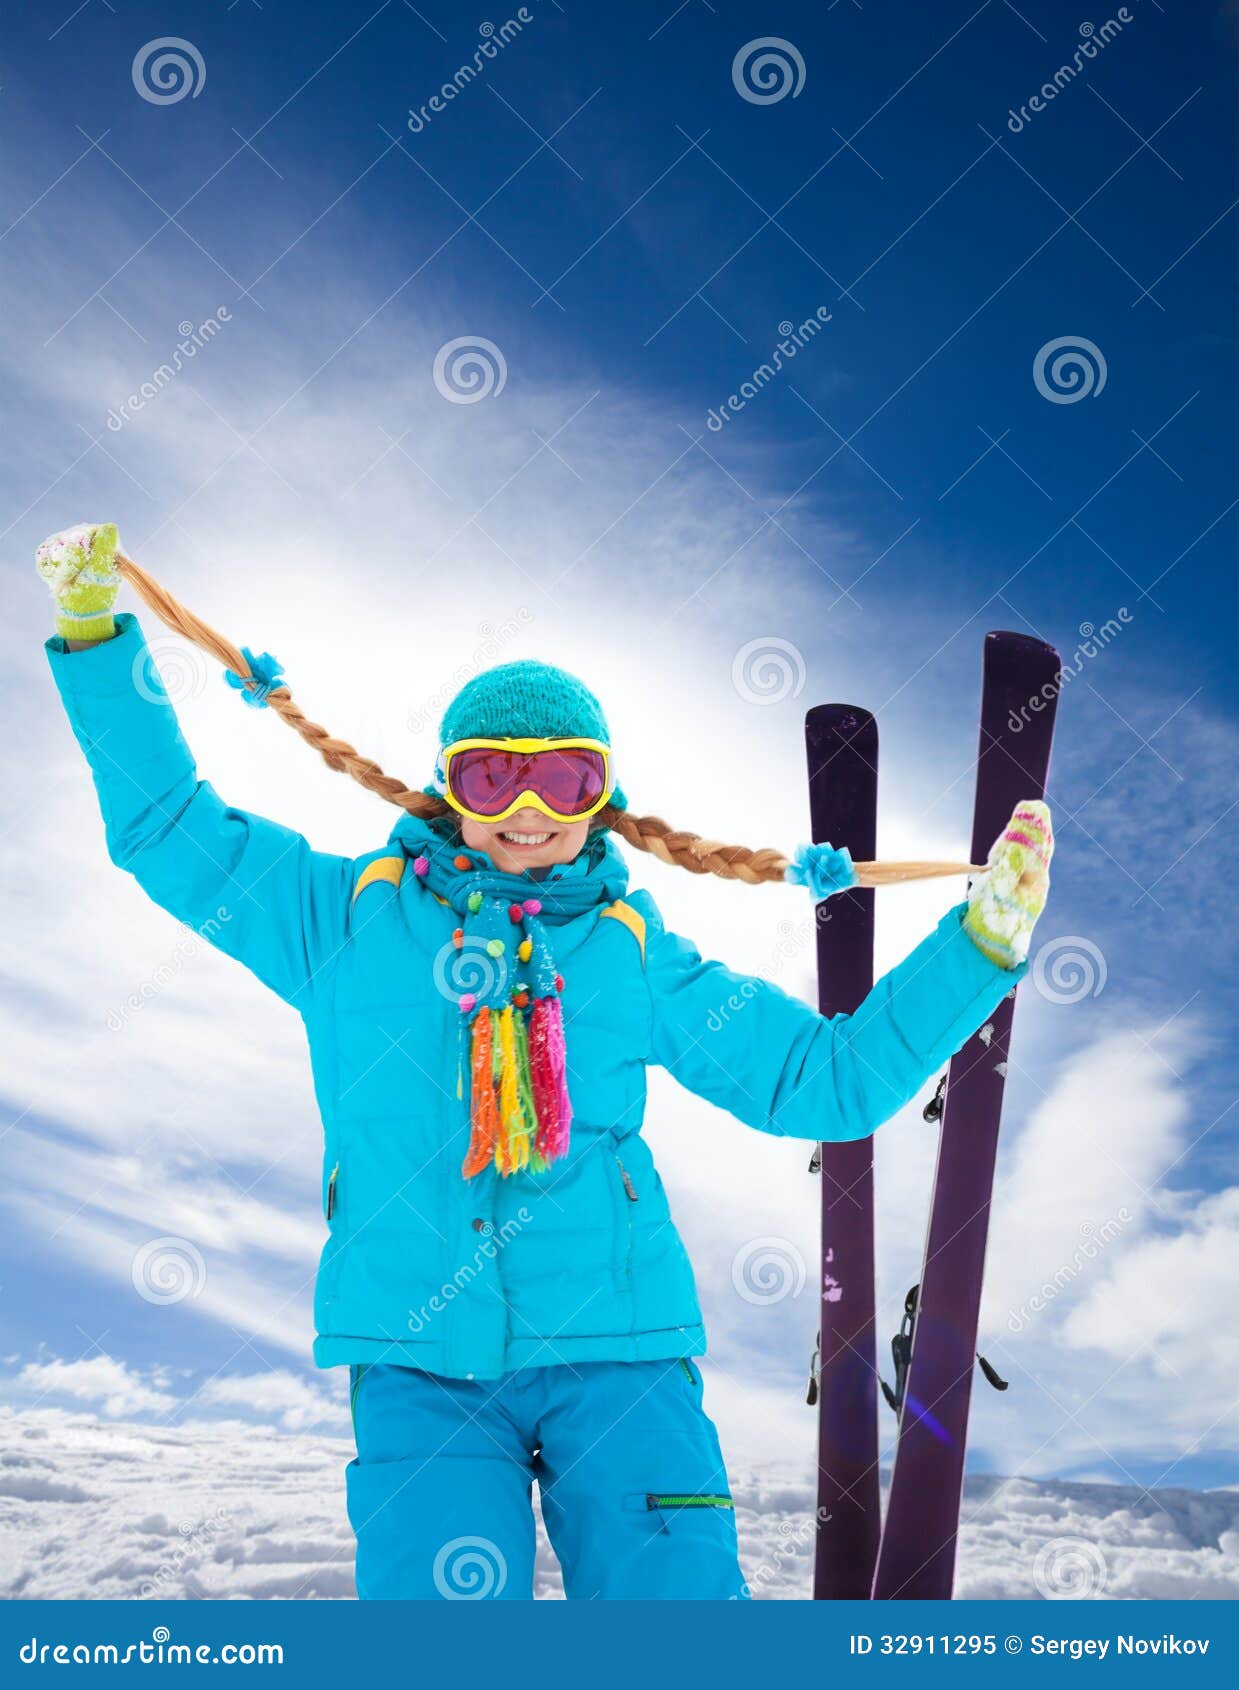 https://thumbs.dreamstime.com/z/blond-cute-girl-ski-winter-vacation-portrait-years-old-old-skis-mountains-pulling-her-long-braids-32911295.jpg